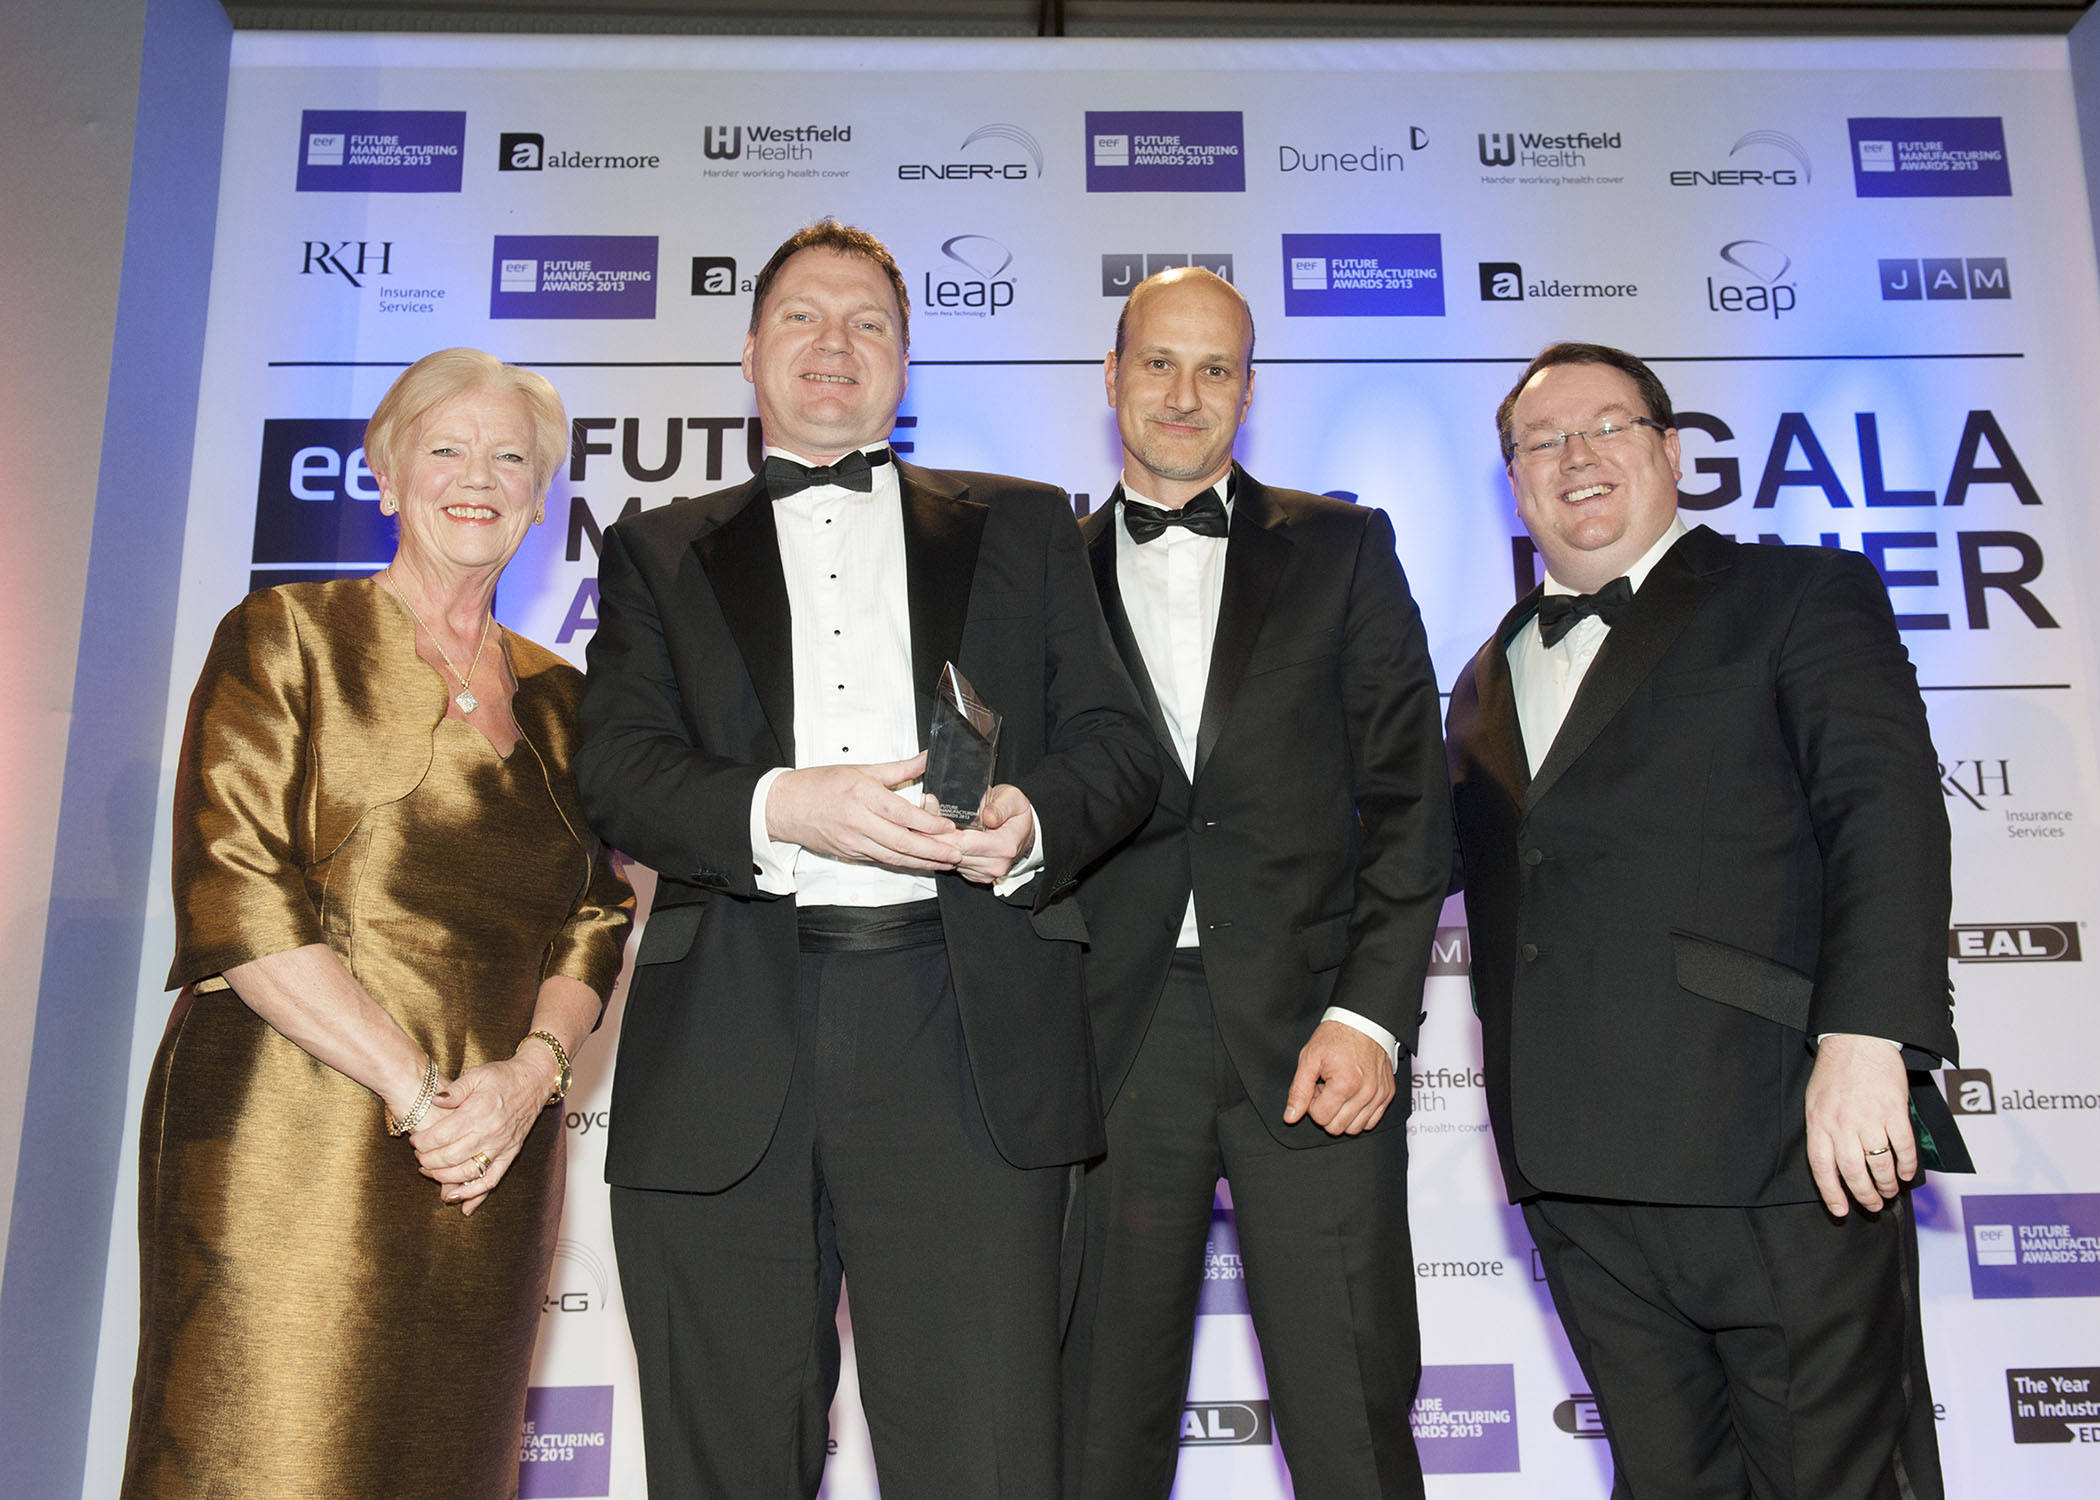 Advanced Insulation - National Winner of The Business Growth Award (l-r) Jill Davies, Westfield Health CEO; Andrew Bennion and Asaf Hisherik, Advanced Insulation; Declan Curry, Awards Compere